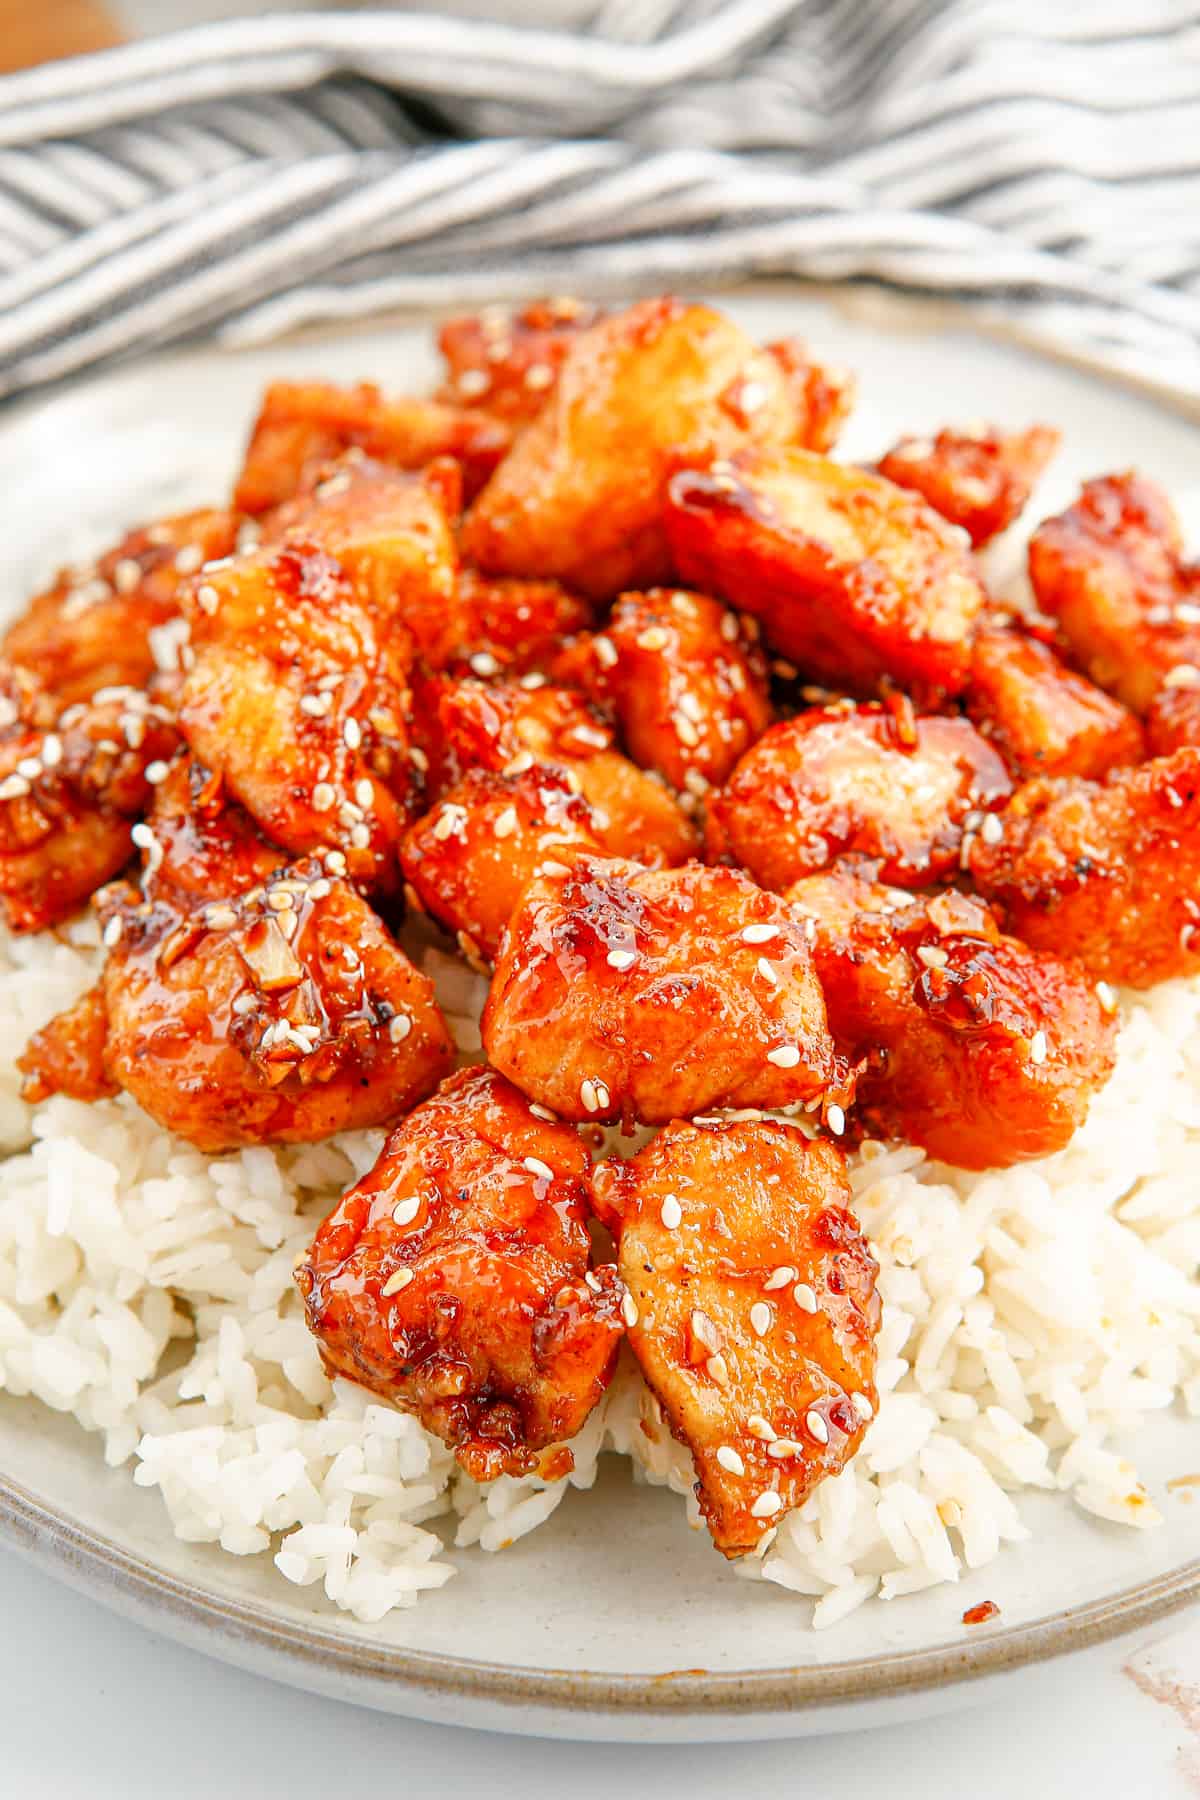 Honey sesame chicken breast pieces served over rice